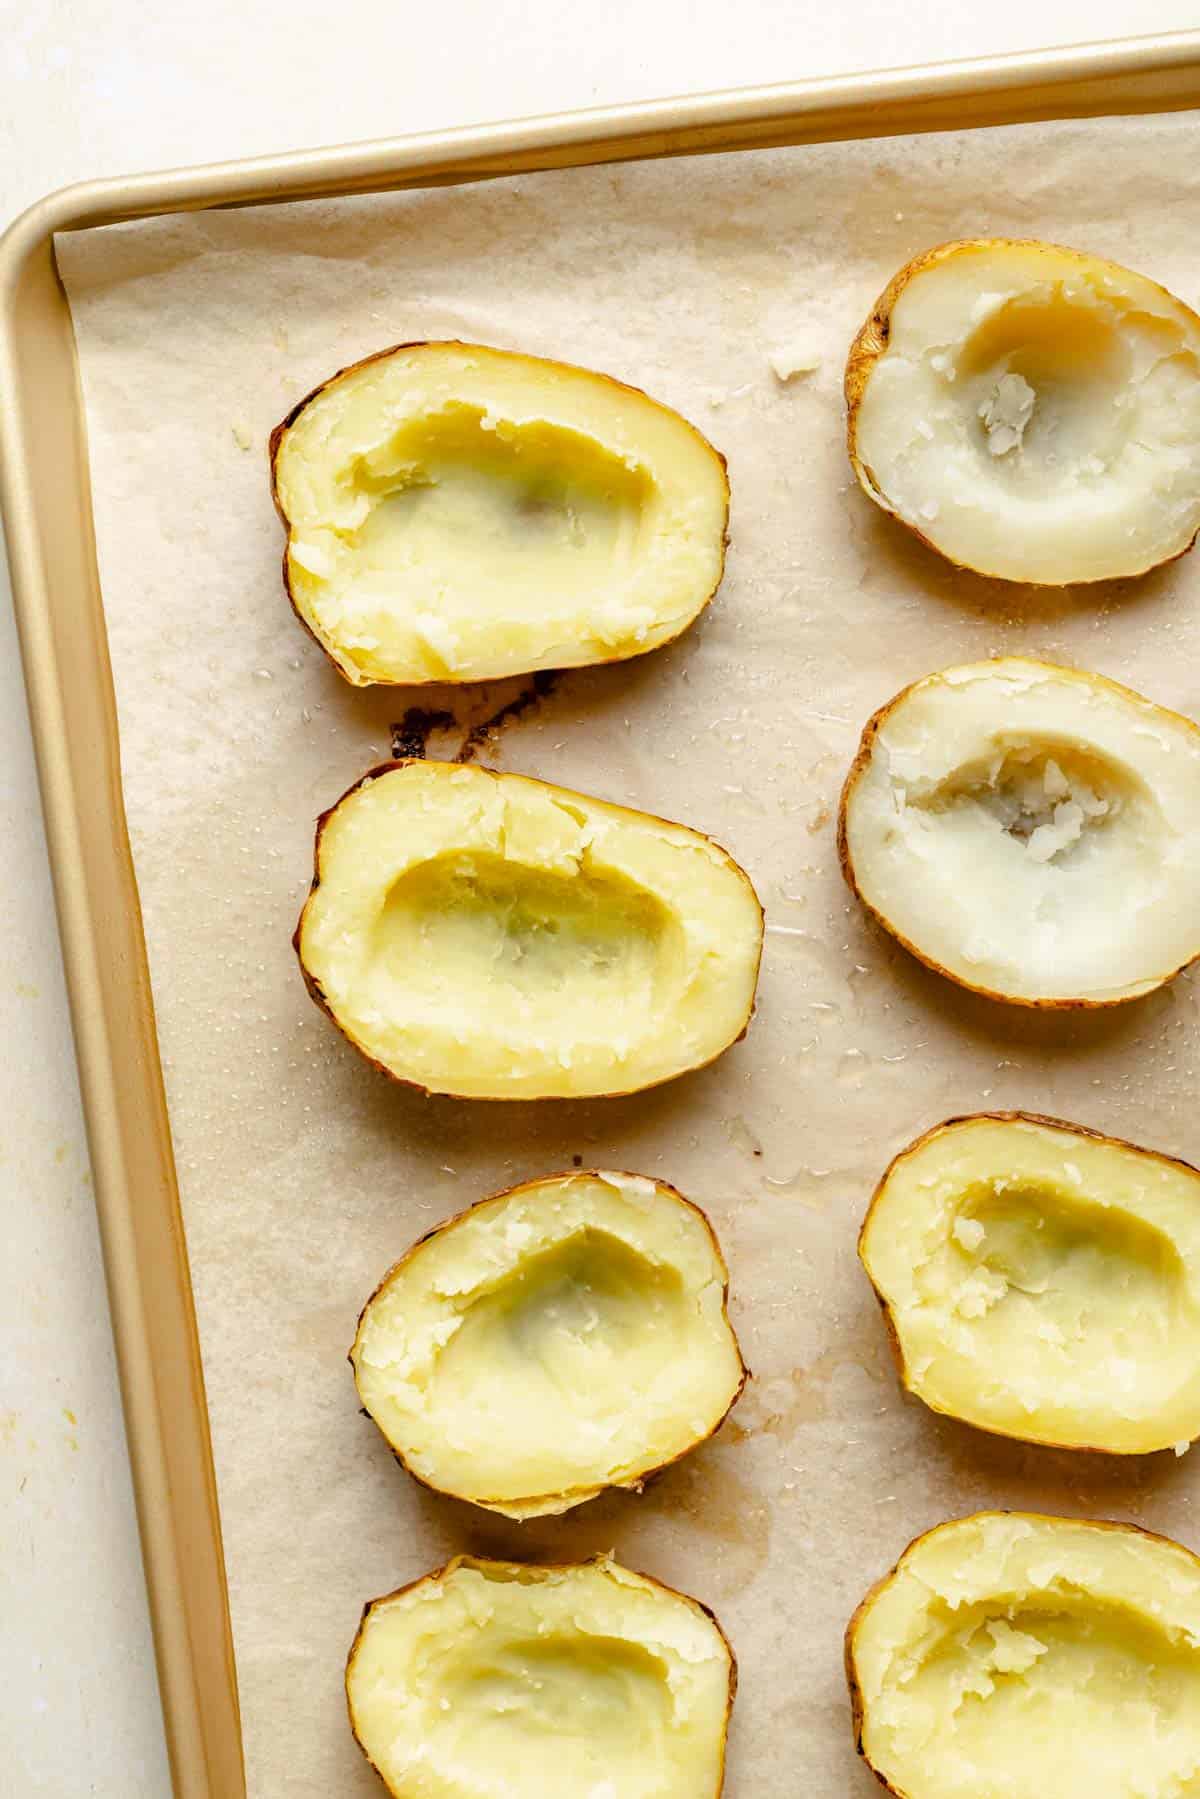 baked potatoes have had their middles scooped on a baking sheet